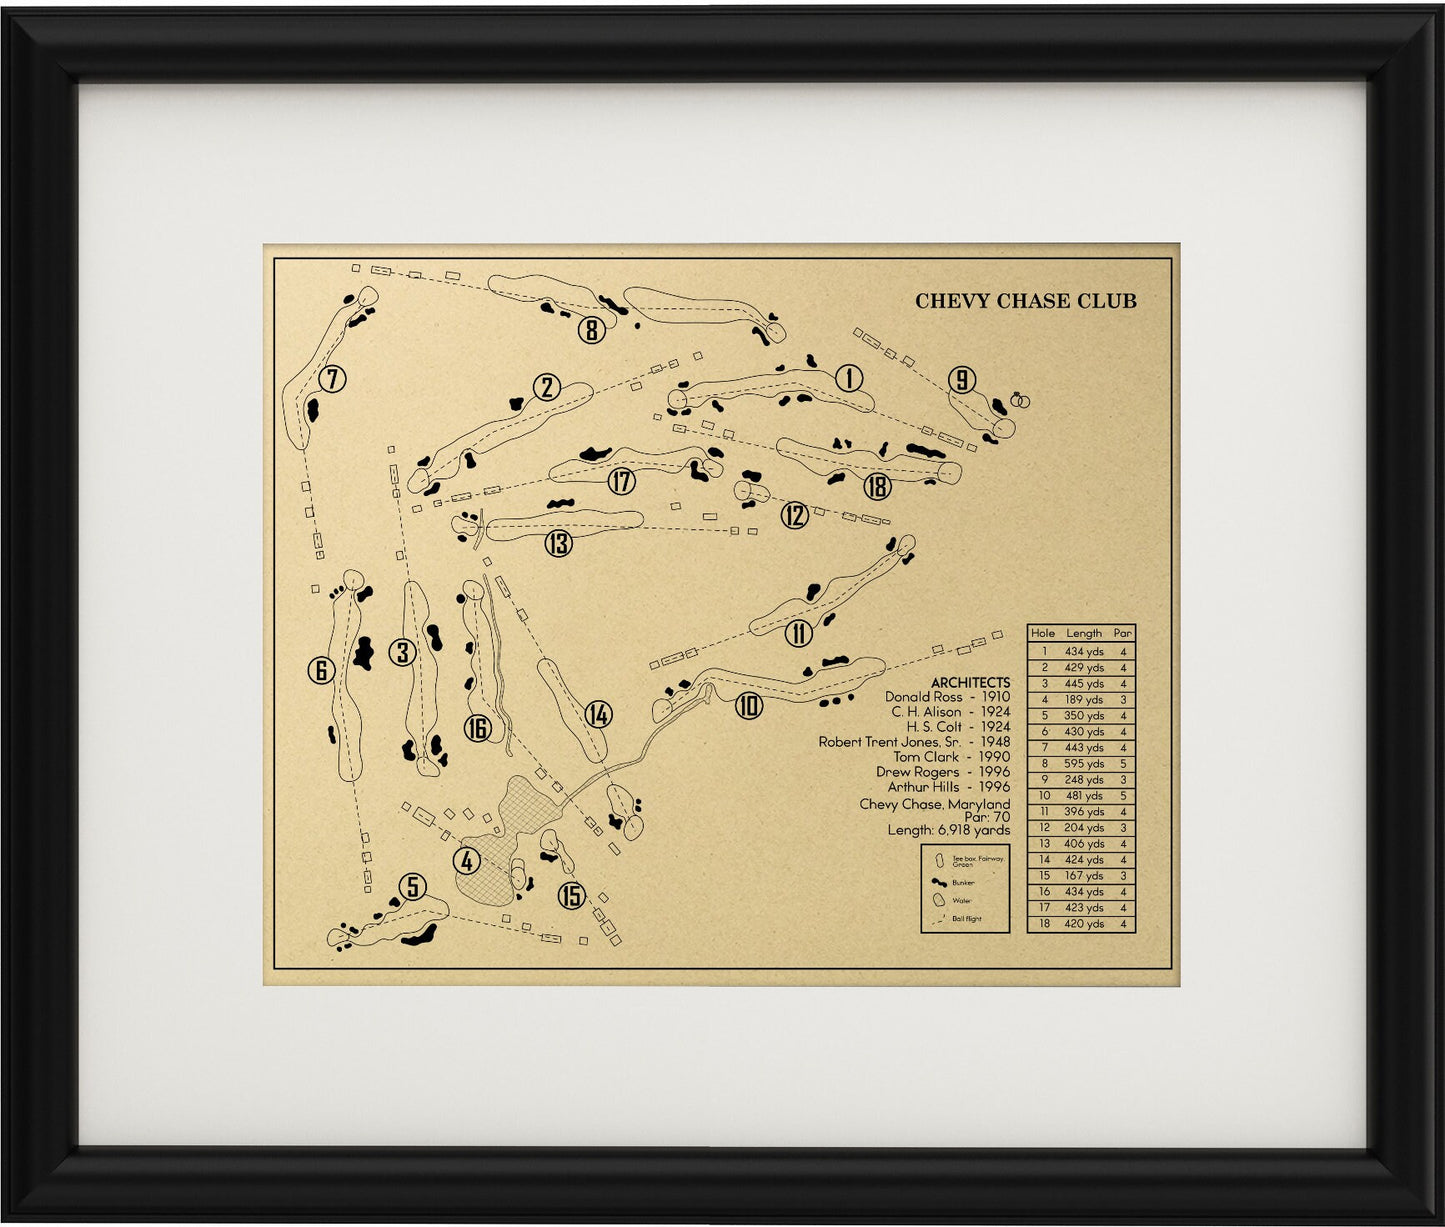 Chevy Chase Club Outline (Print)